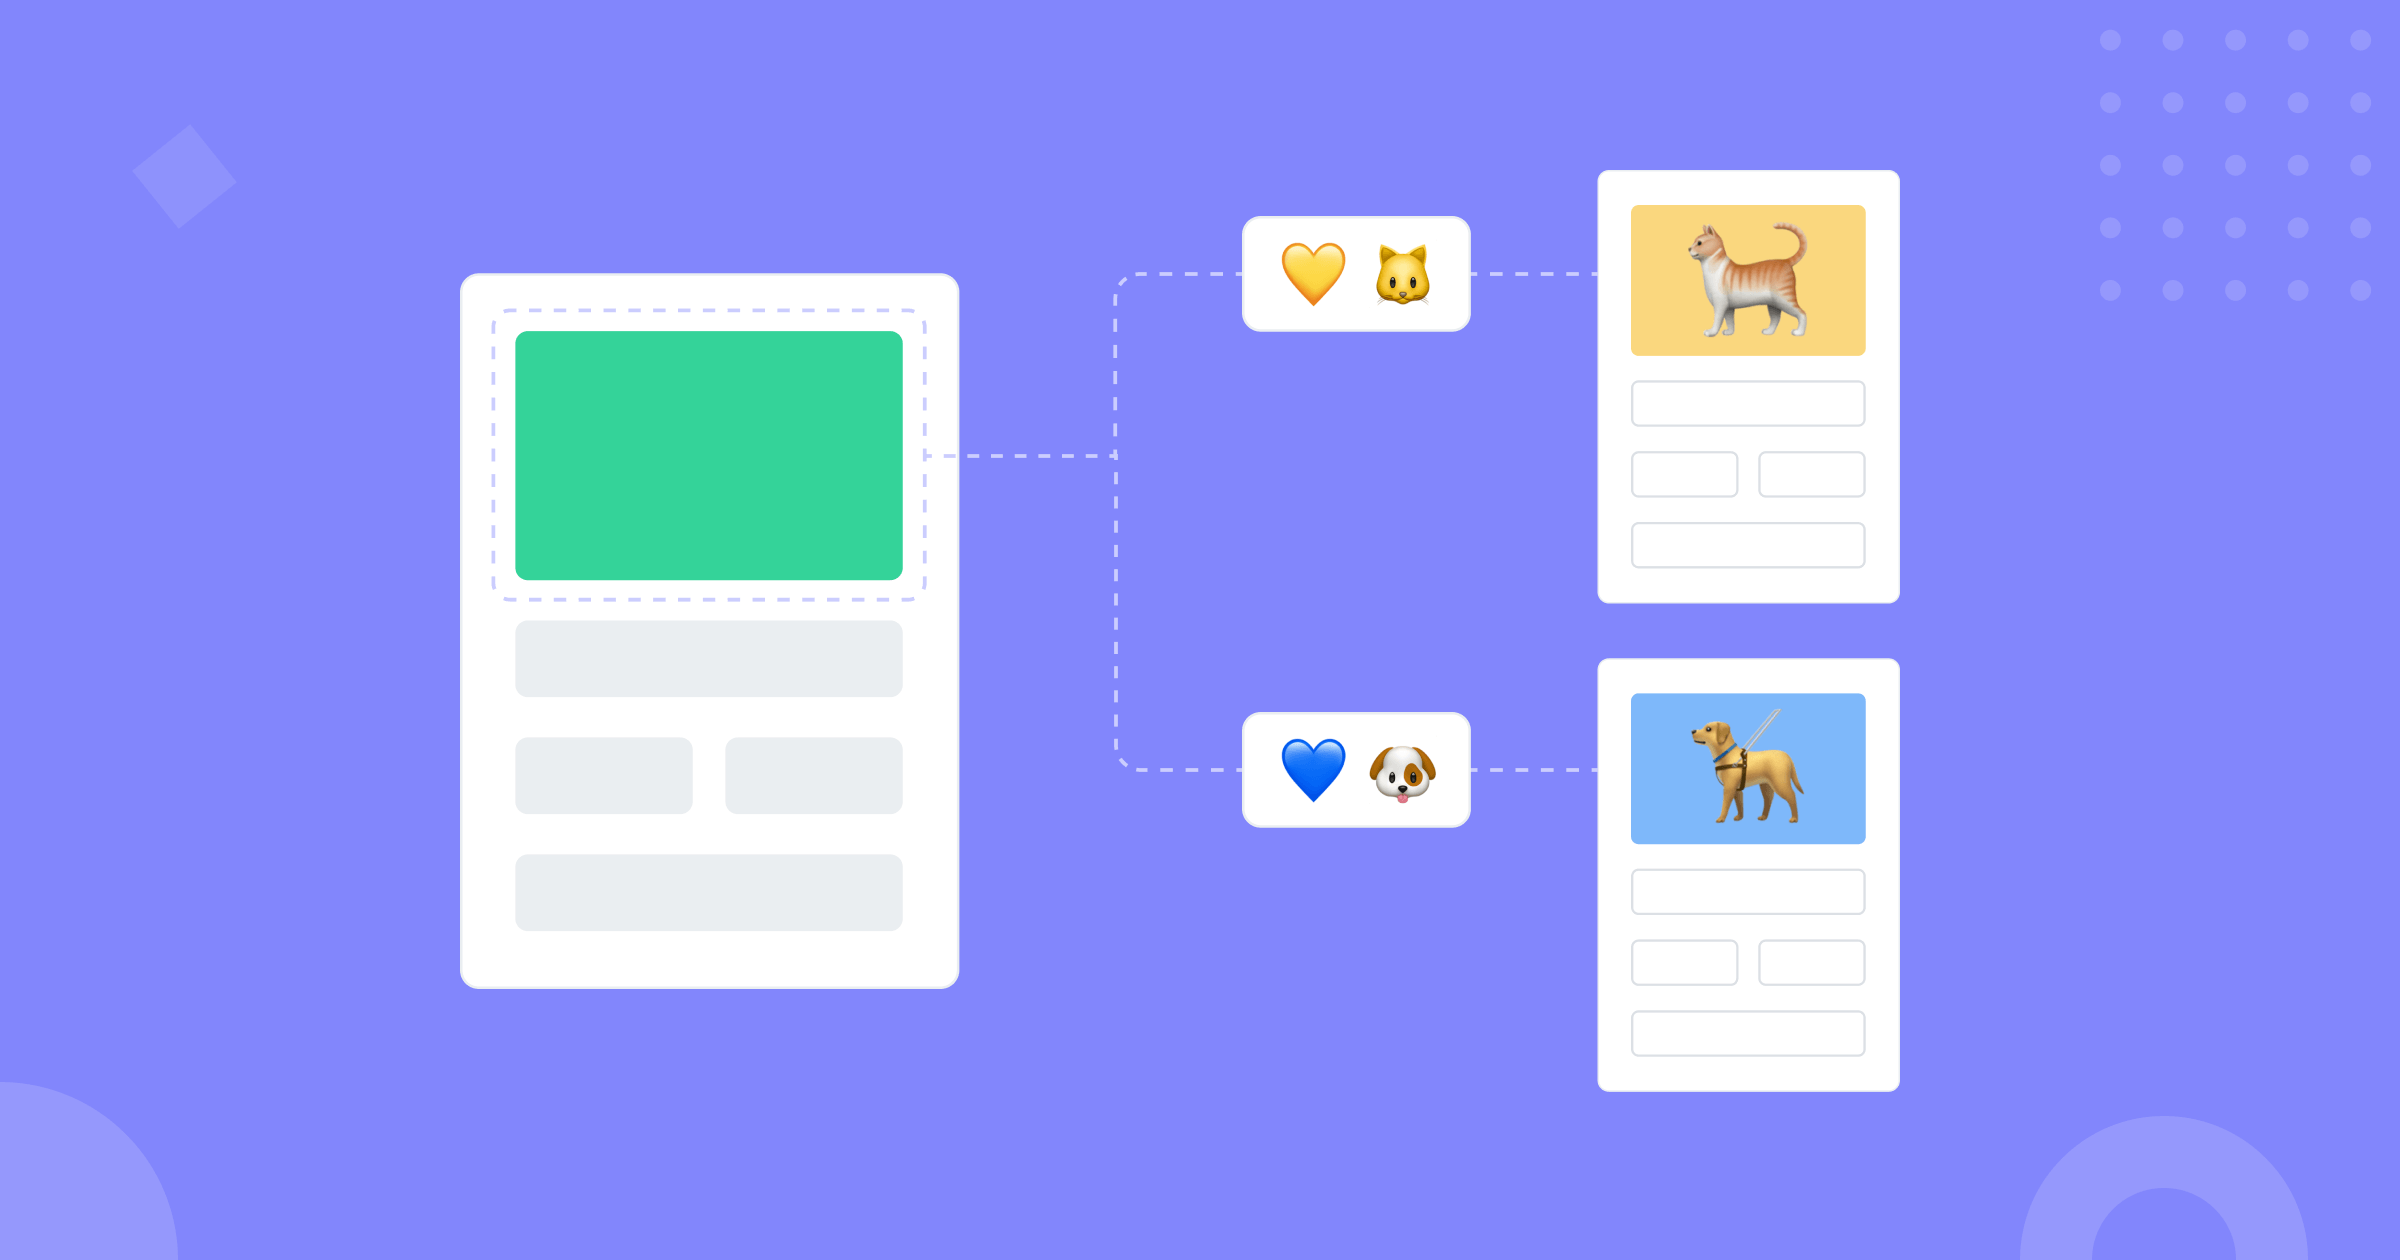 A page with green content is connected to two pages: one yellow and one blue, the yellow one is represented by an emoji of a cat and the blue one of a dog that signify the personalization by interest that will guide each user to one page or another.